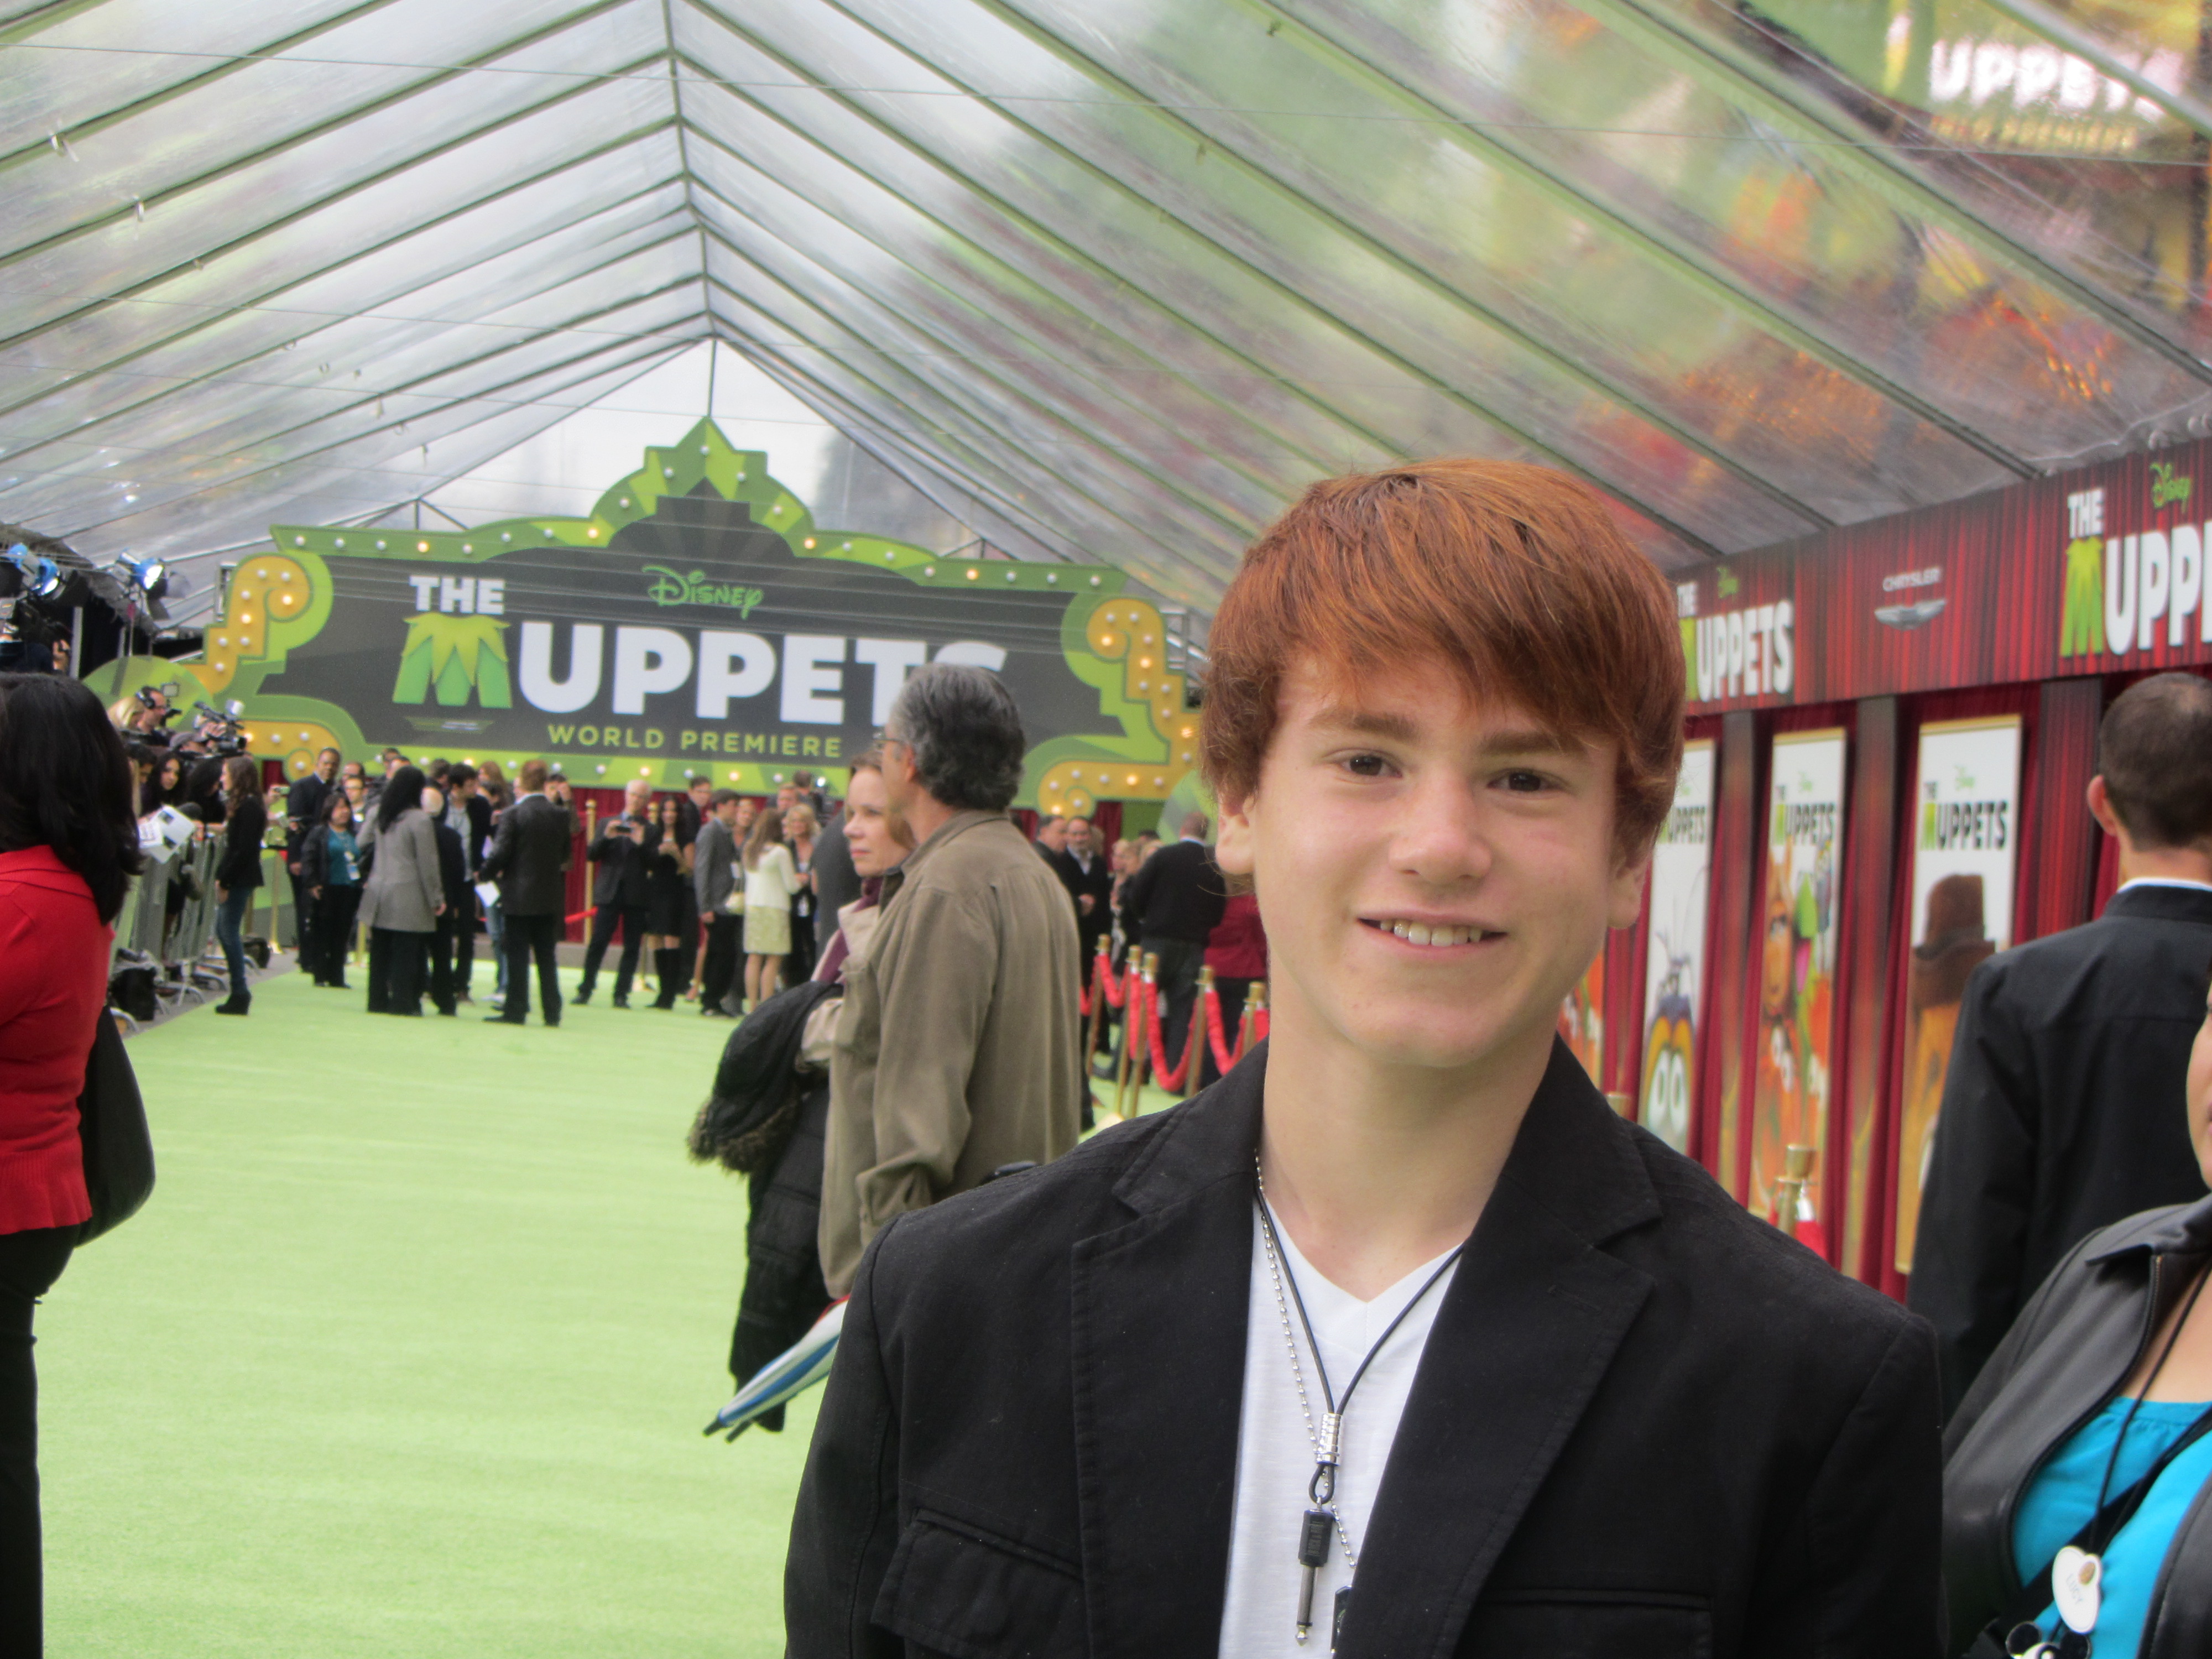 Justin Tinucci at the premiere of The Muppets November 12 2011 at the El Capitan Theatre, Hollywood.